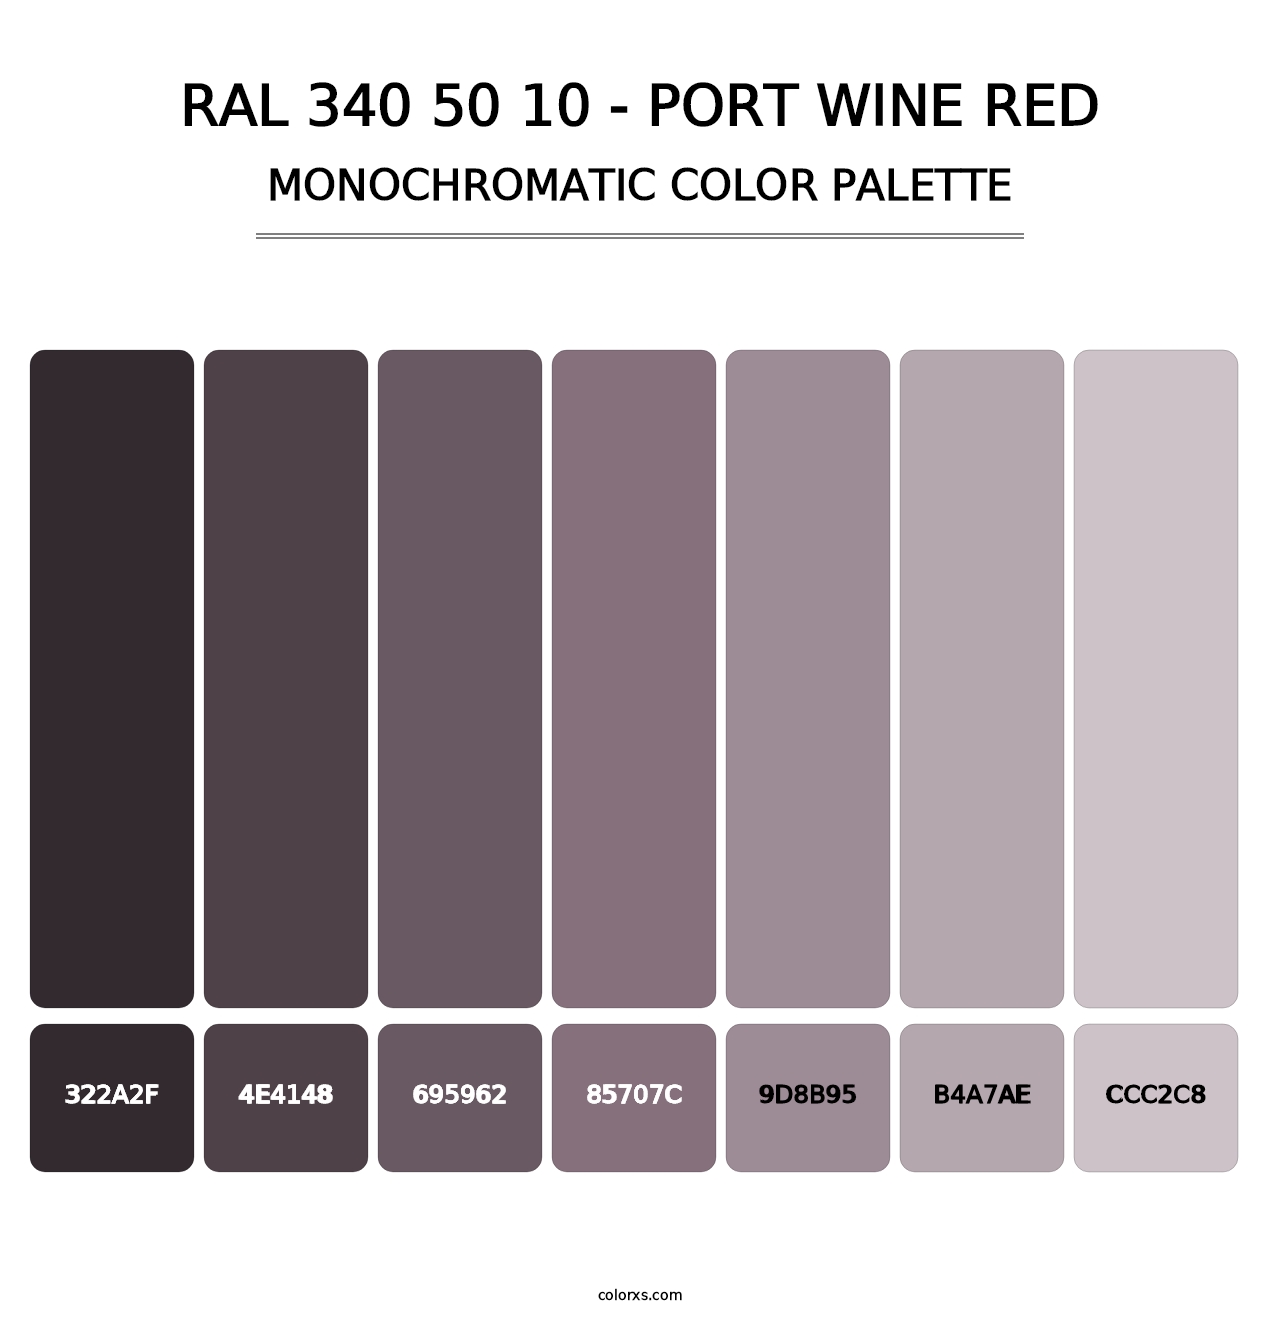 RAL 340 50 10 - Port Wine Red - Monochromatic Color Palette